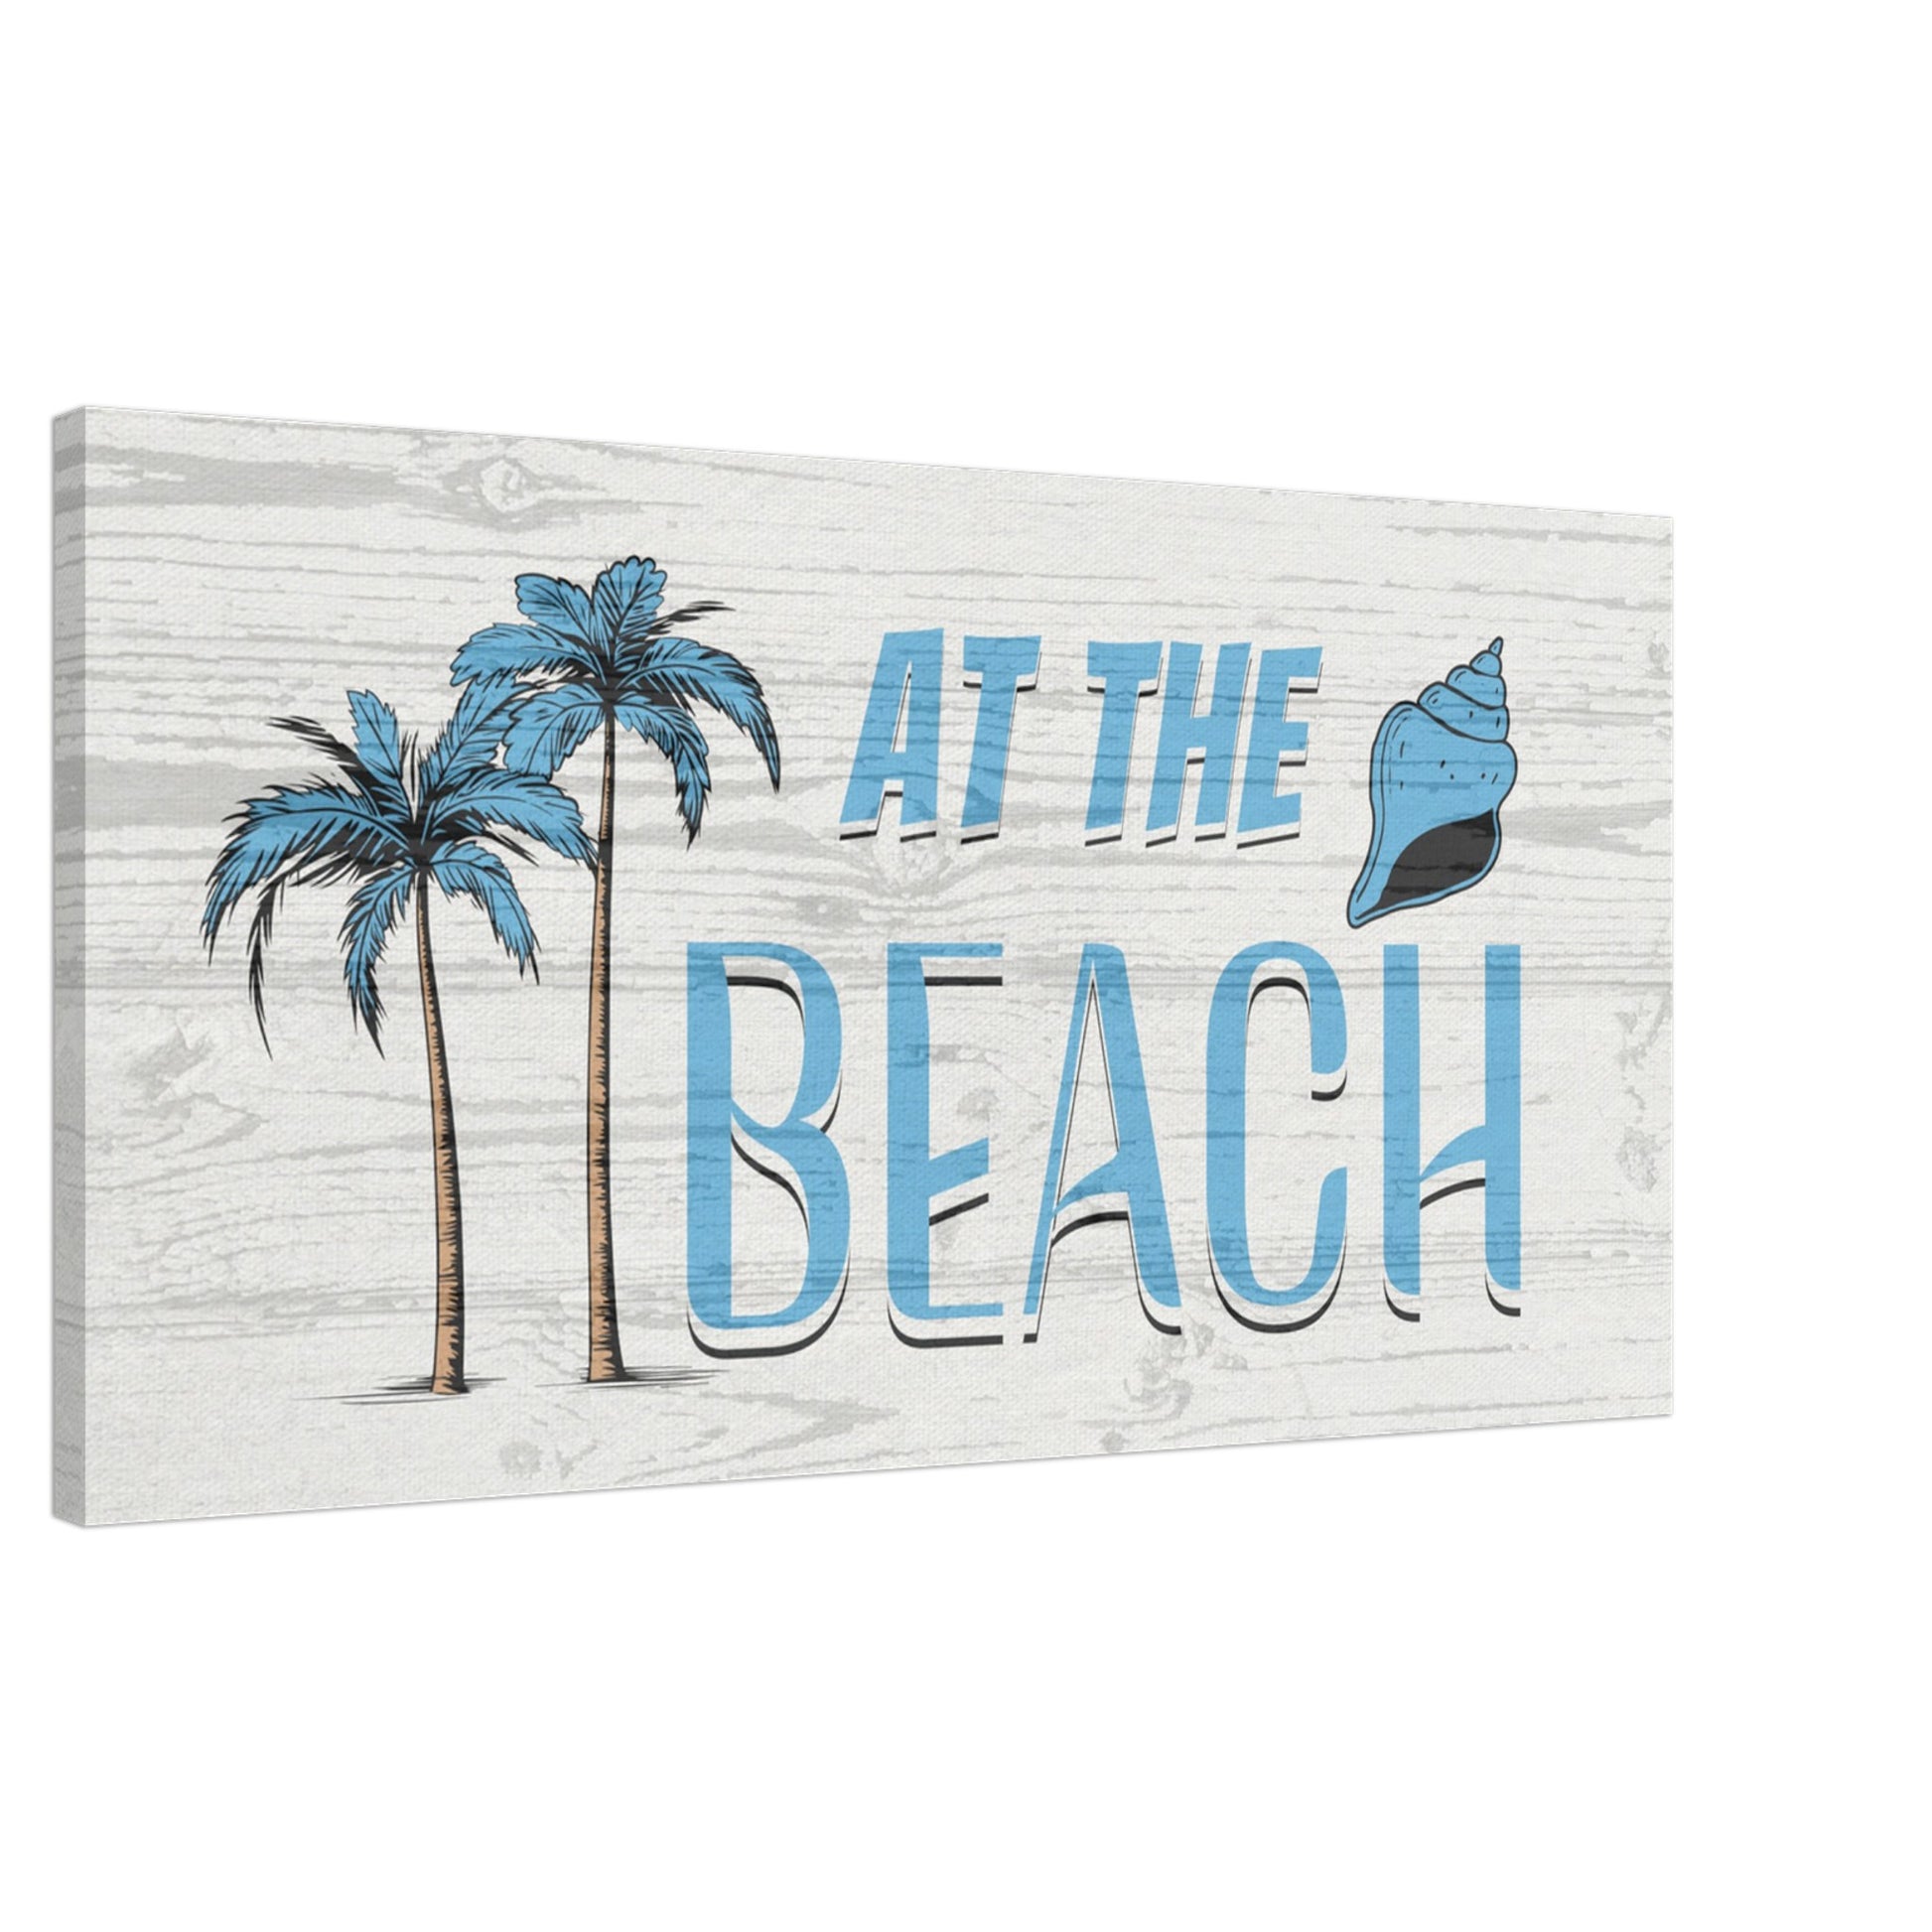 At the Beach Large Blue Canvas Wall Print Caribbean Rays